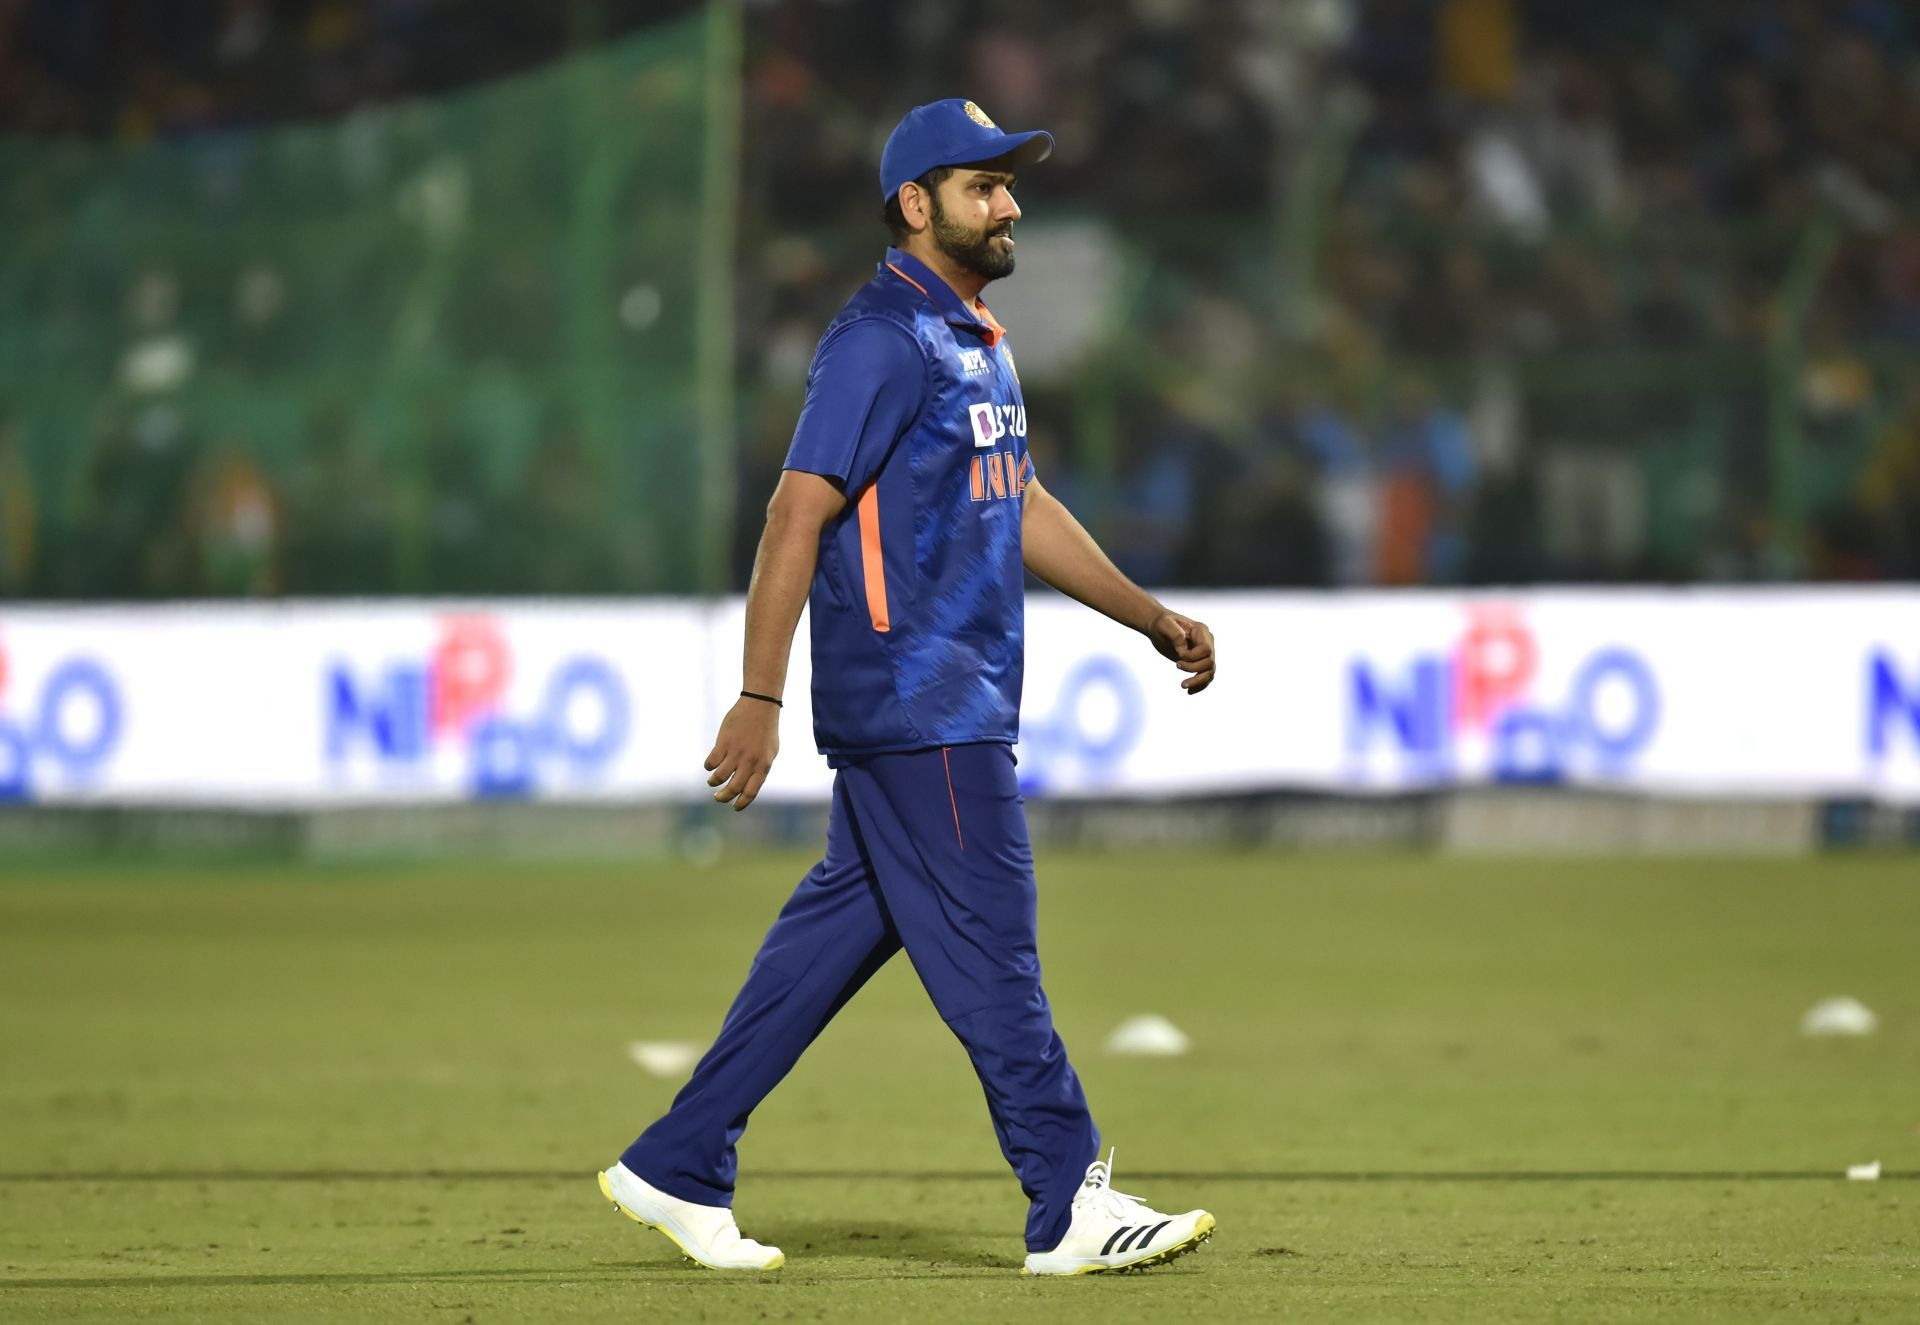 Rohit Sharma could prove to be a match-winner for Team India in the T20I series against England. (Image: Getty)